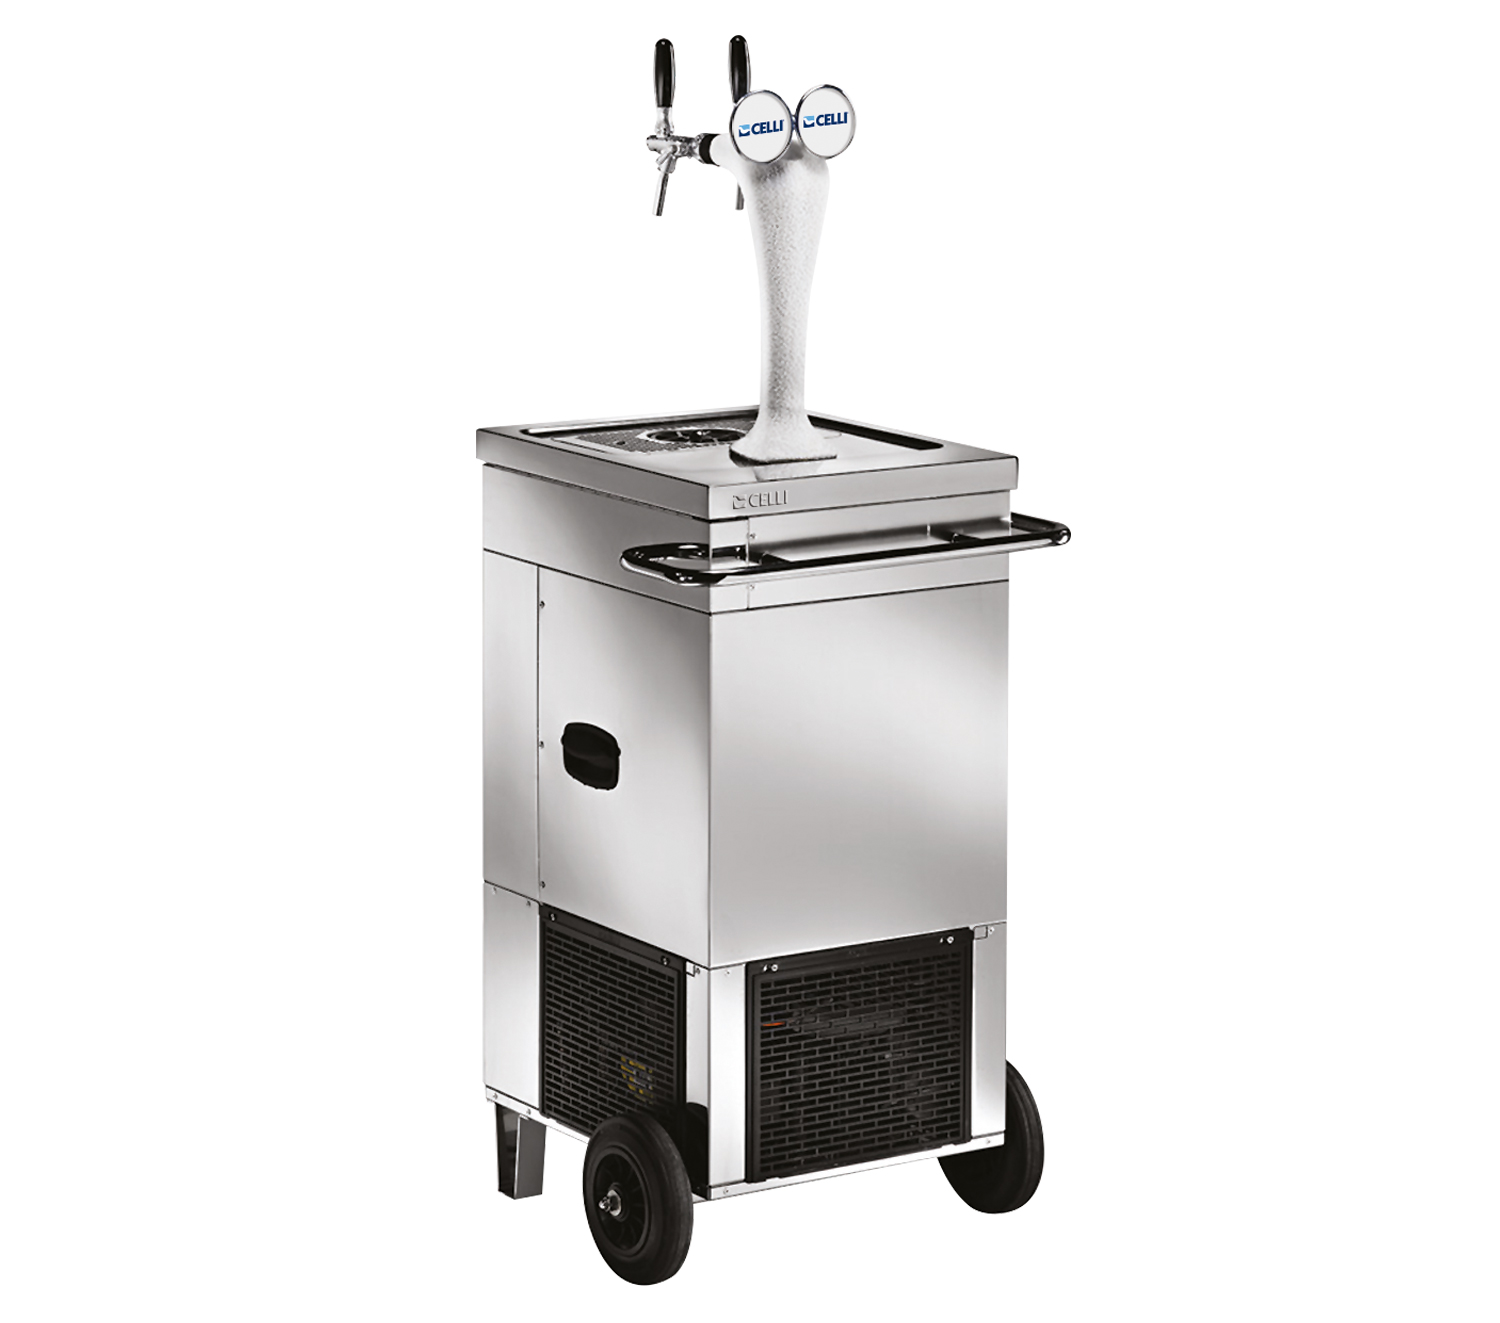 CELLI Blizzard 3 - Draft beer system on wheels